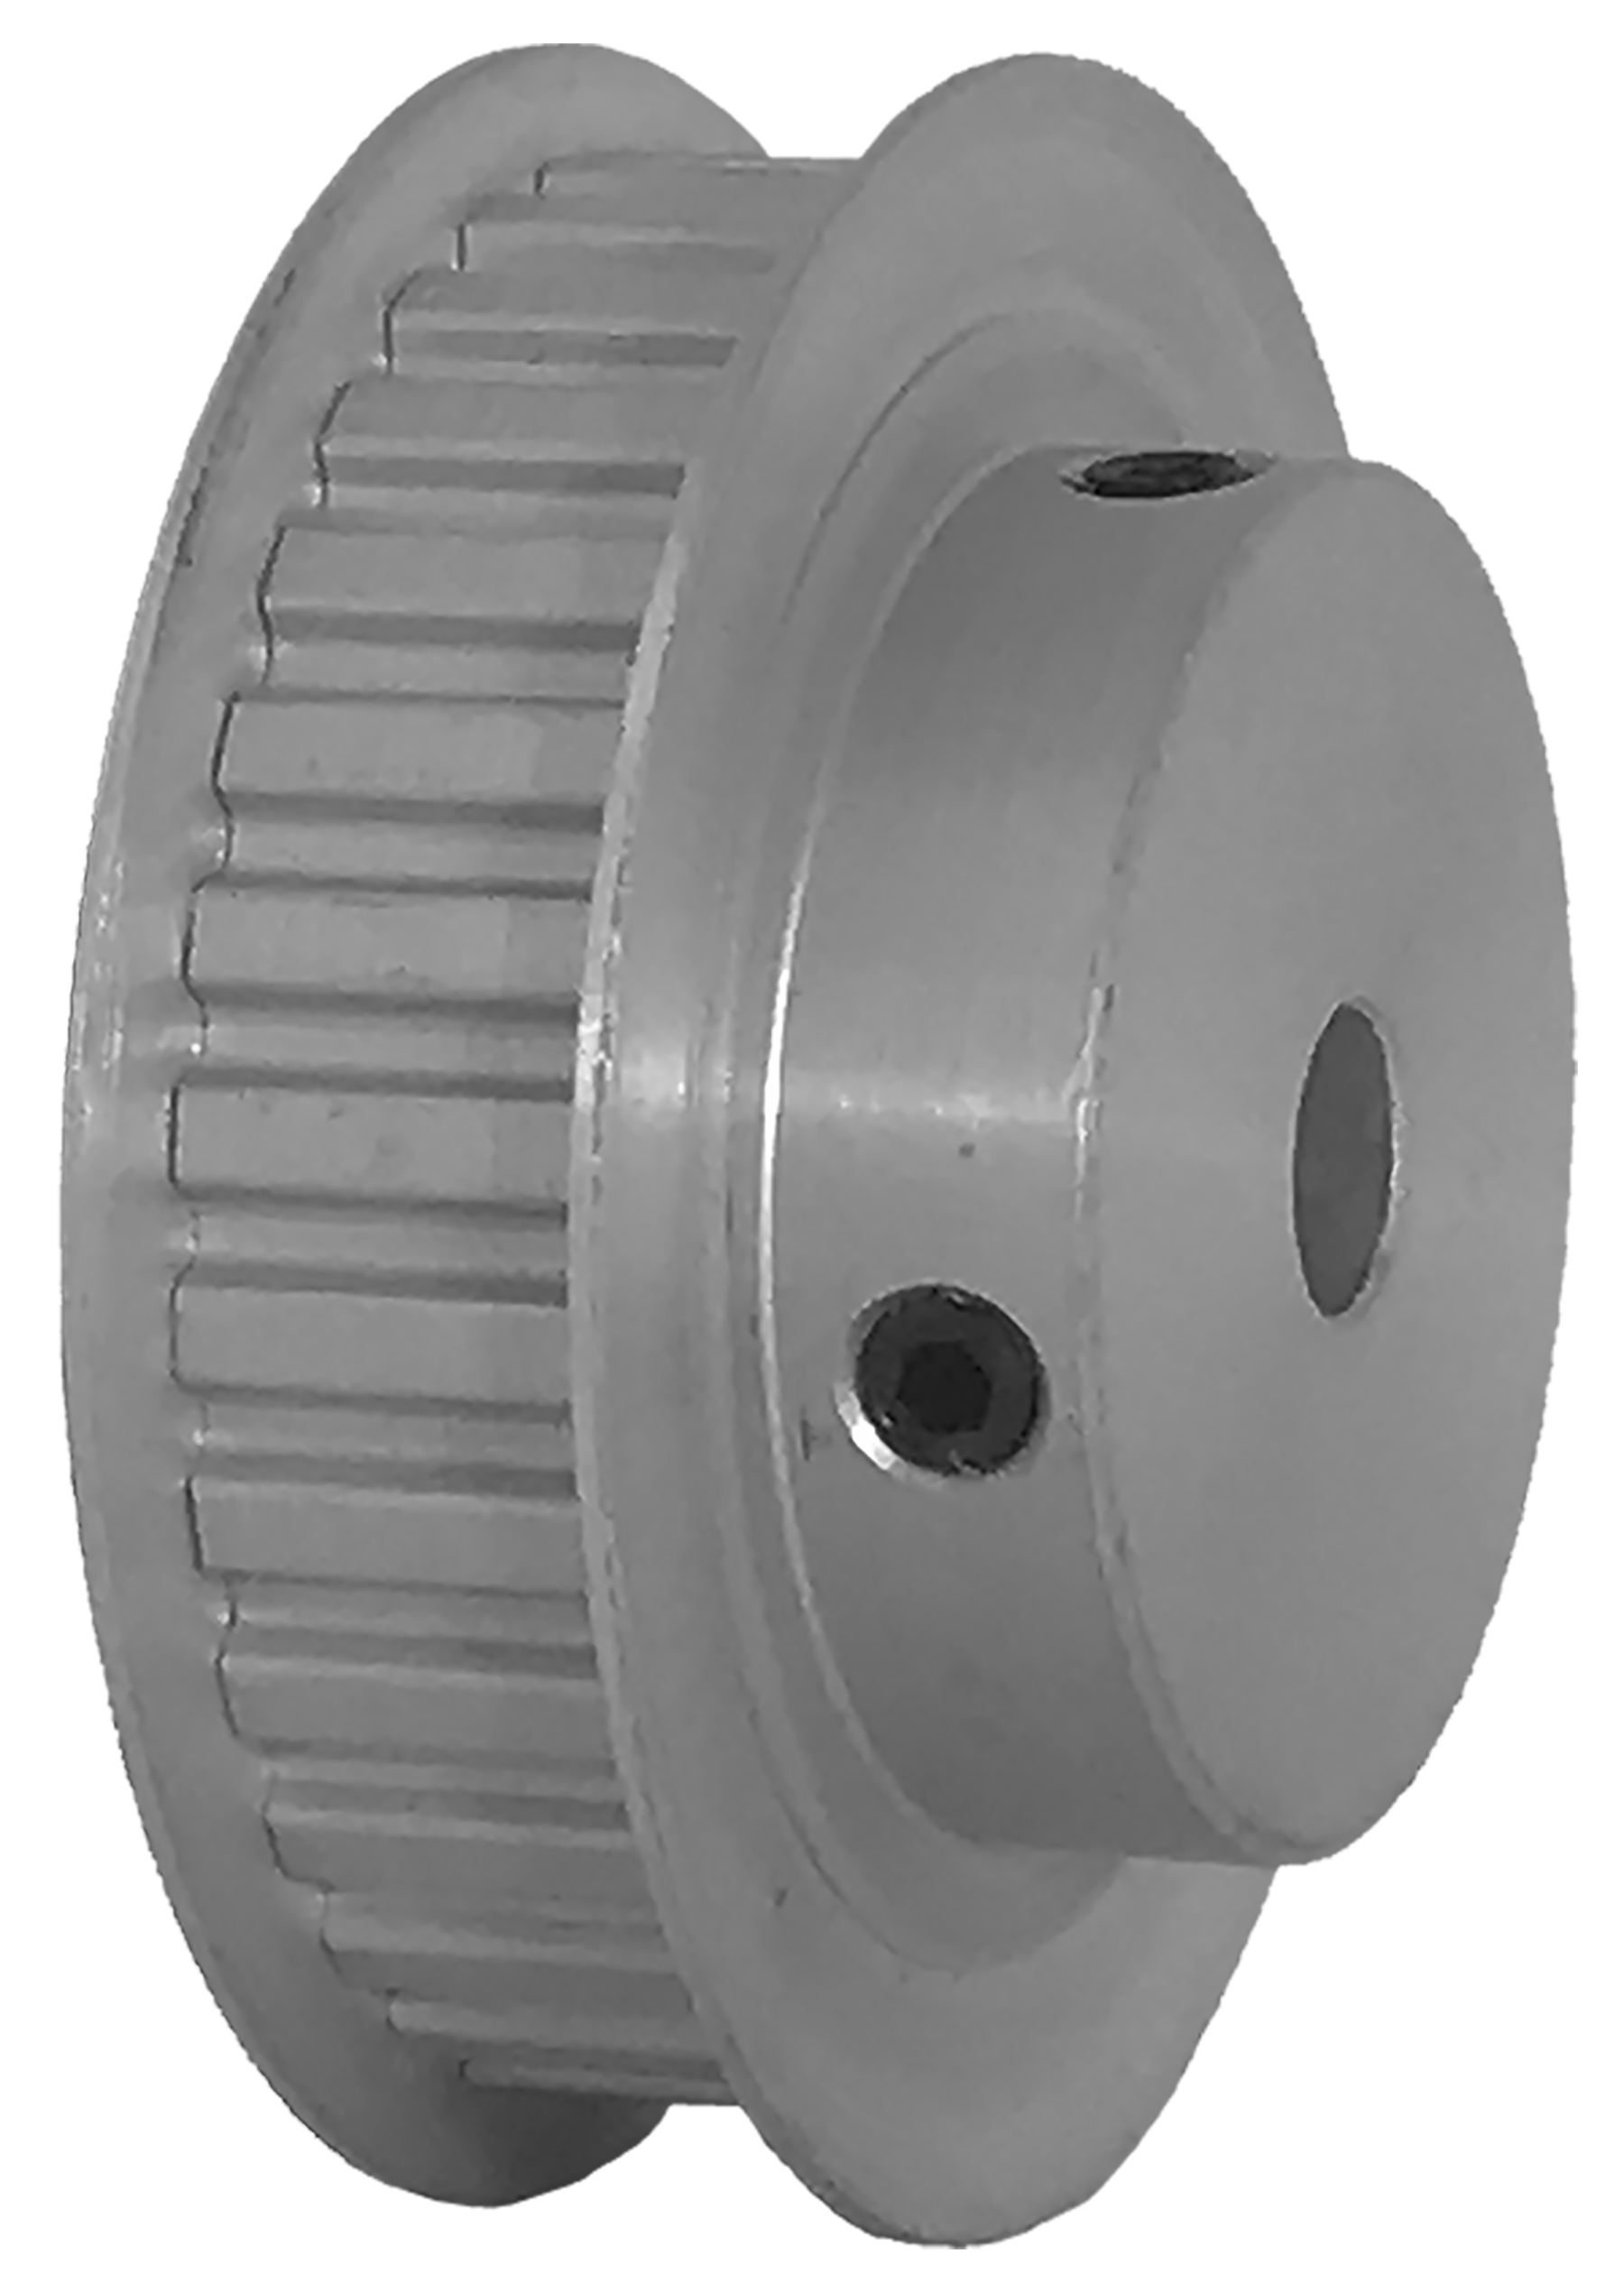 32XL037-6FA4 - Aluminum Imperial Pitch Pulleys